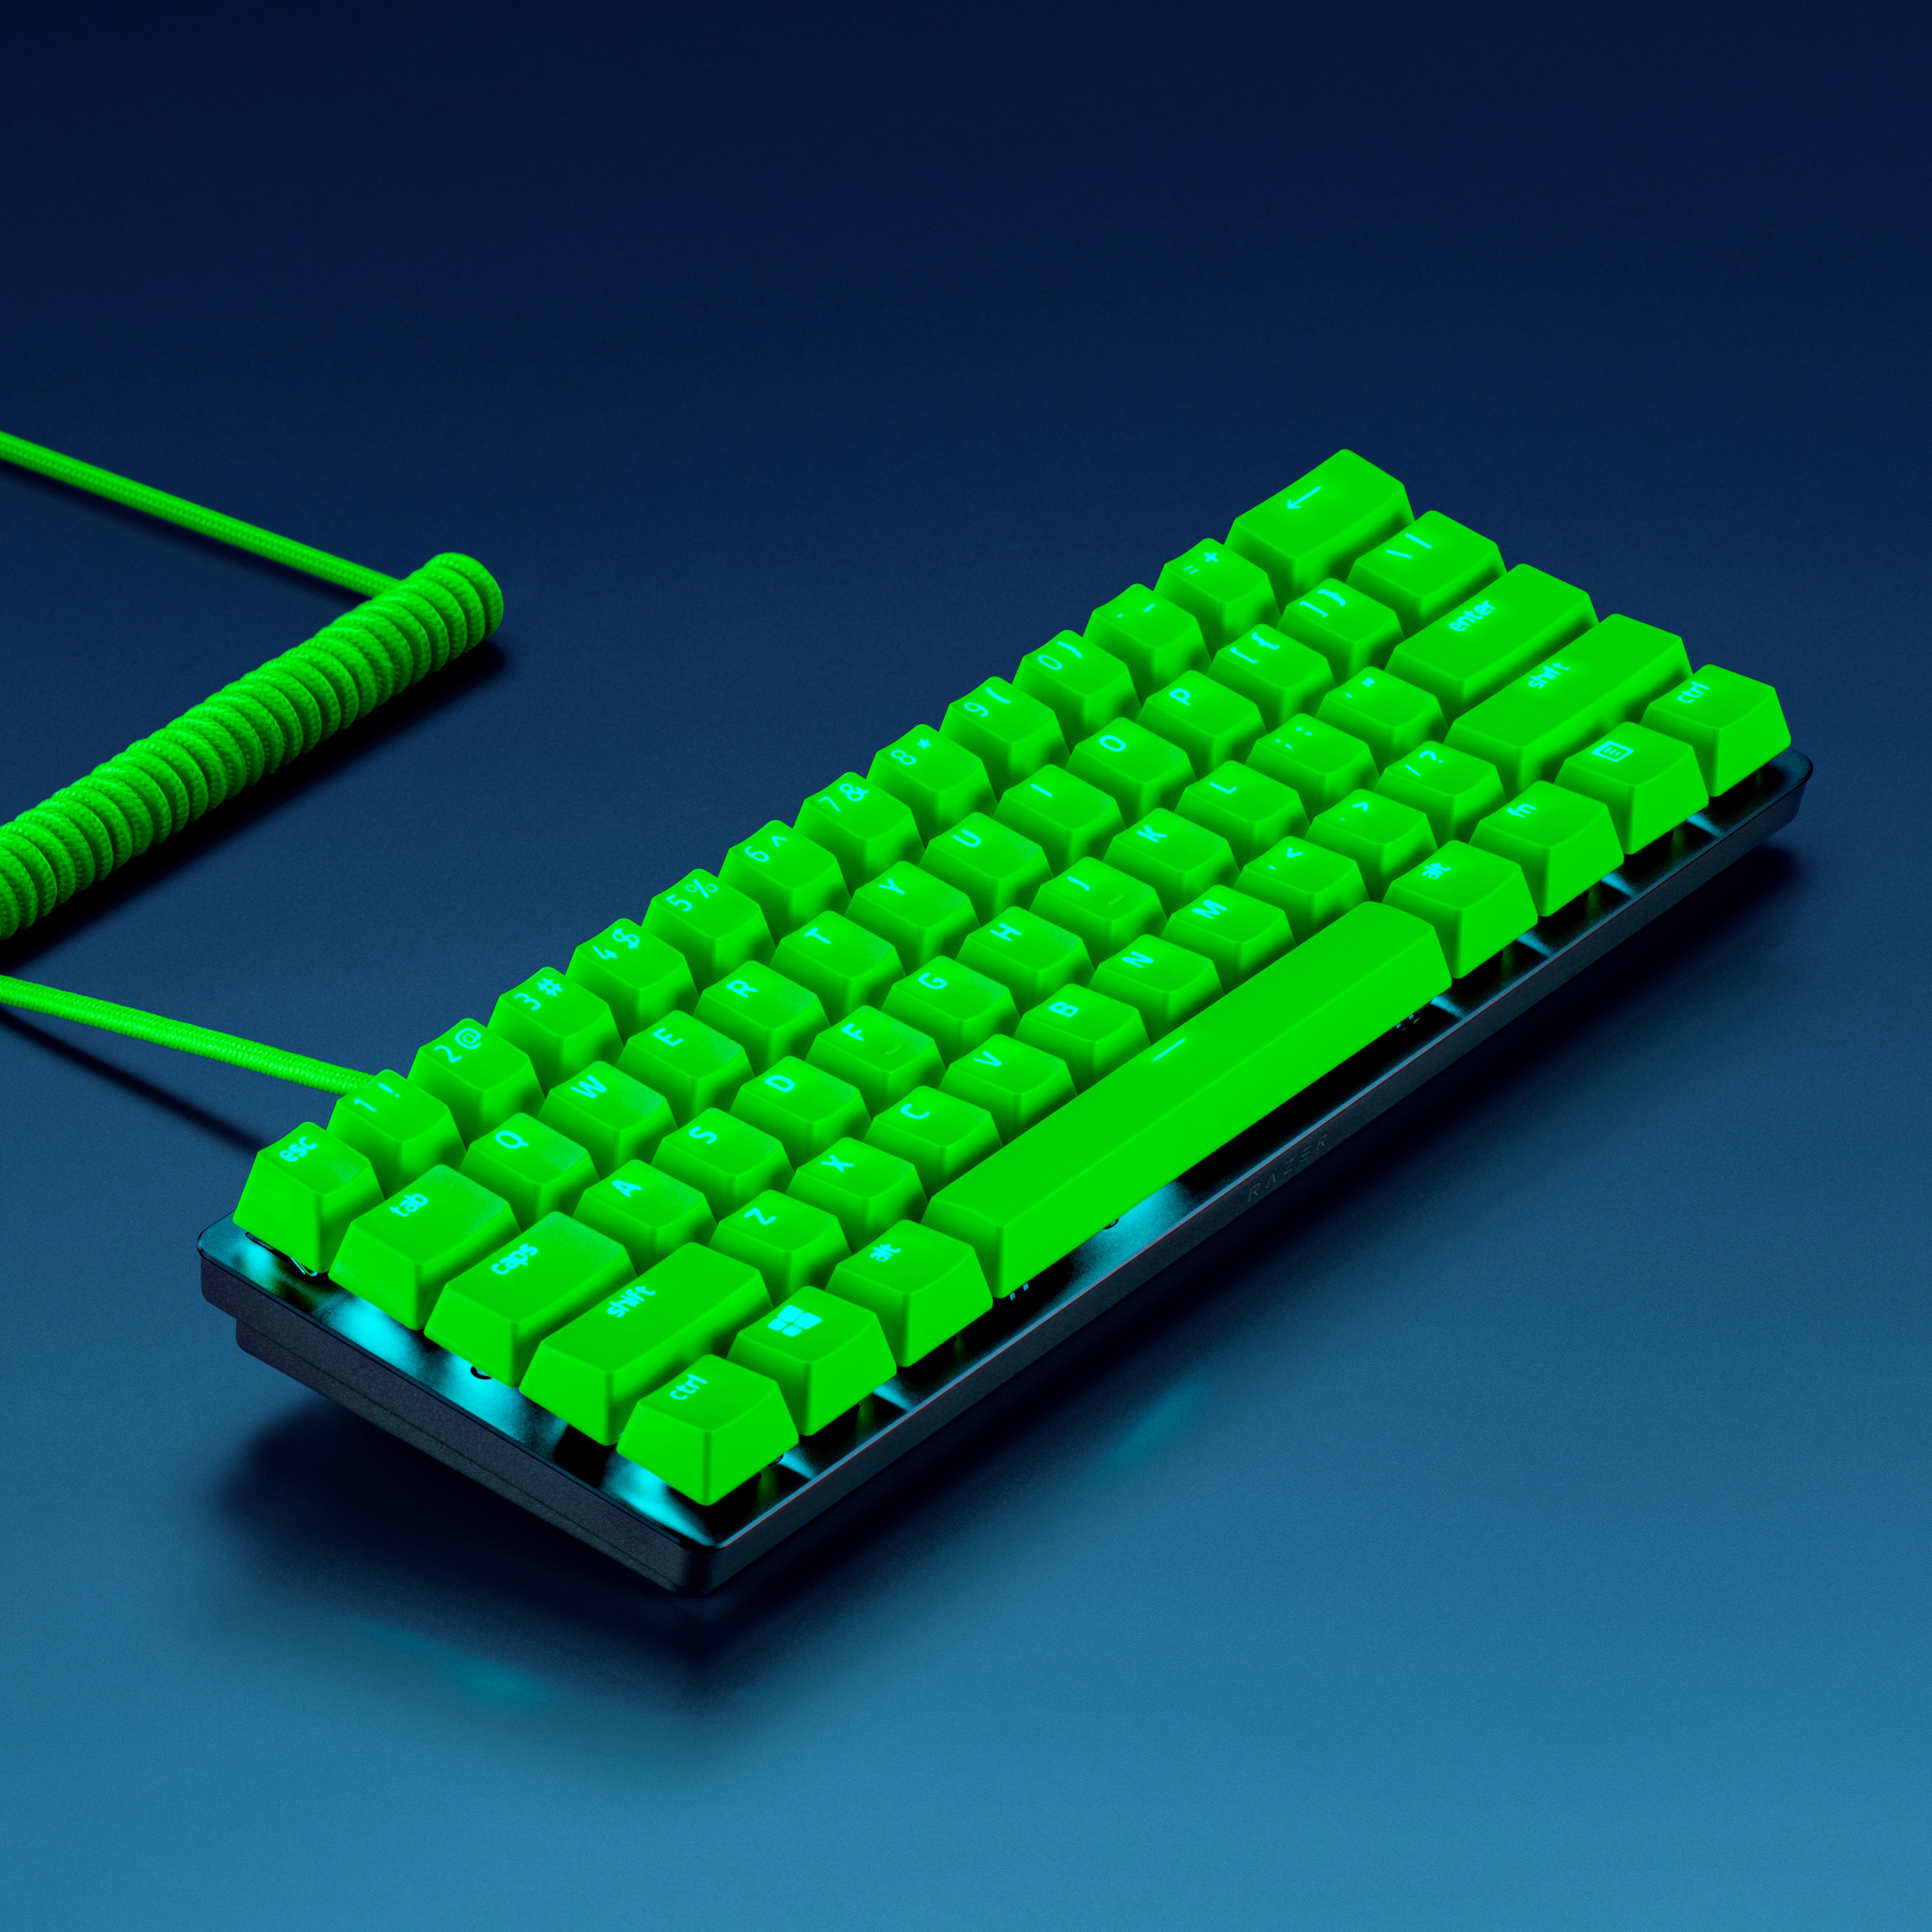 Razer’s PBT keycaps can now be bought with a matching USB cable.